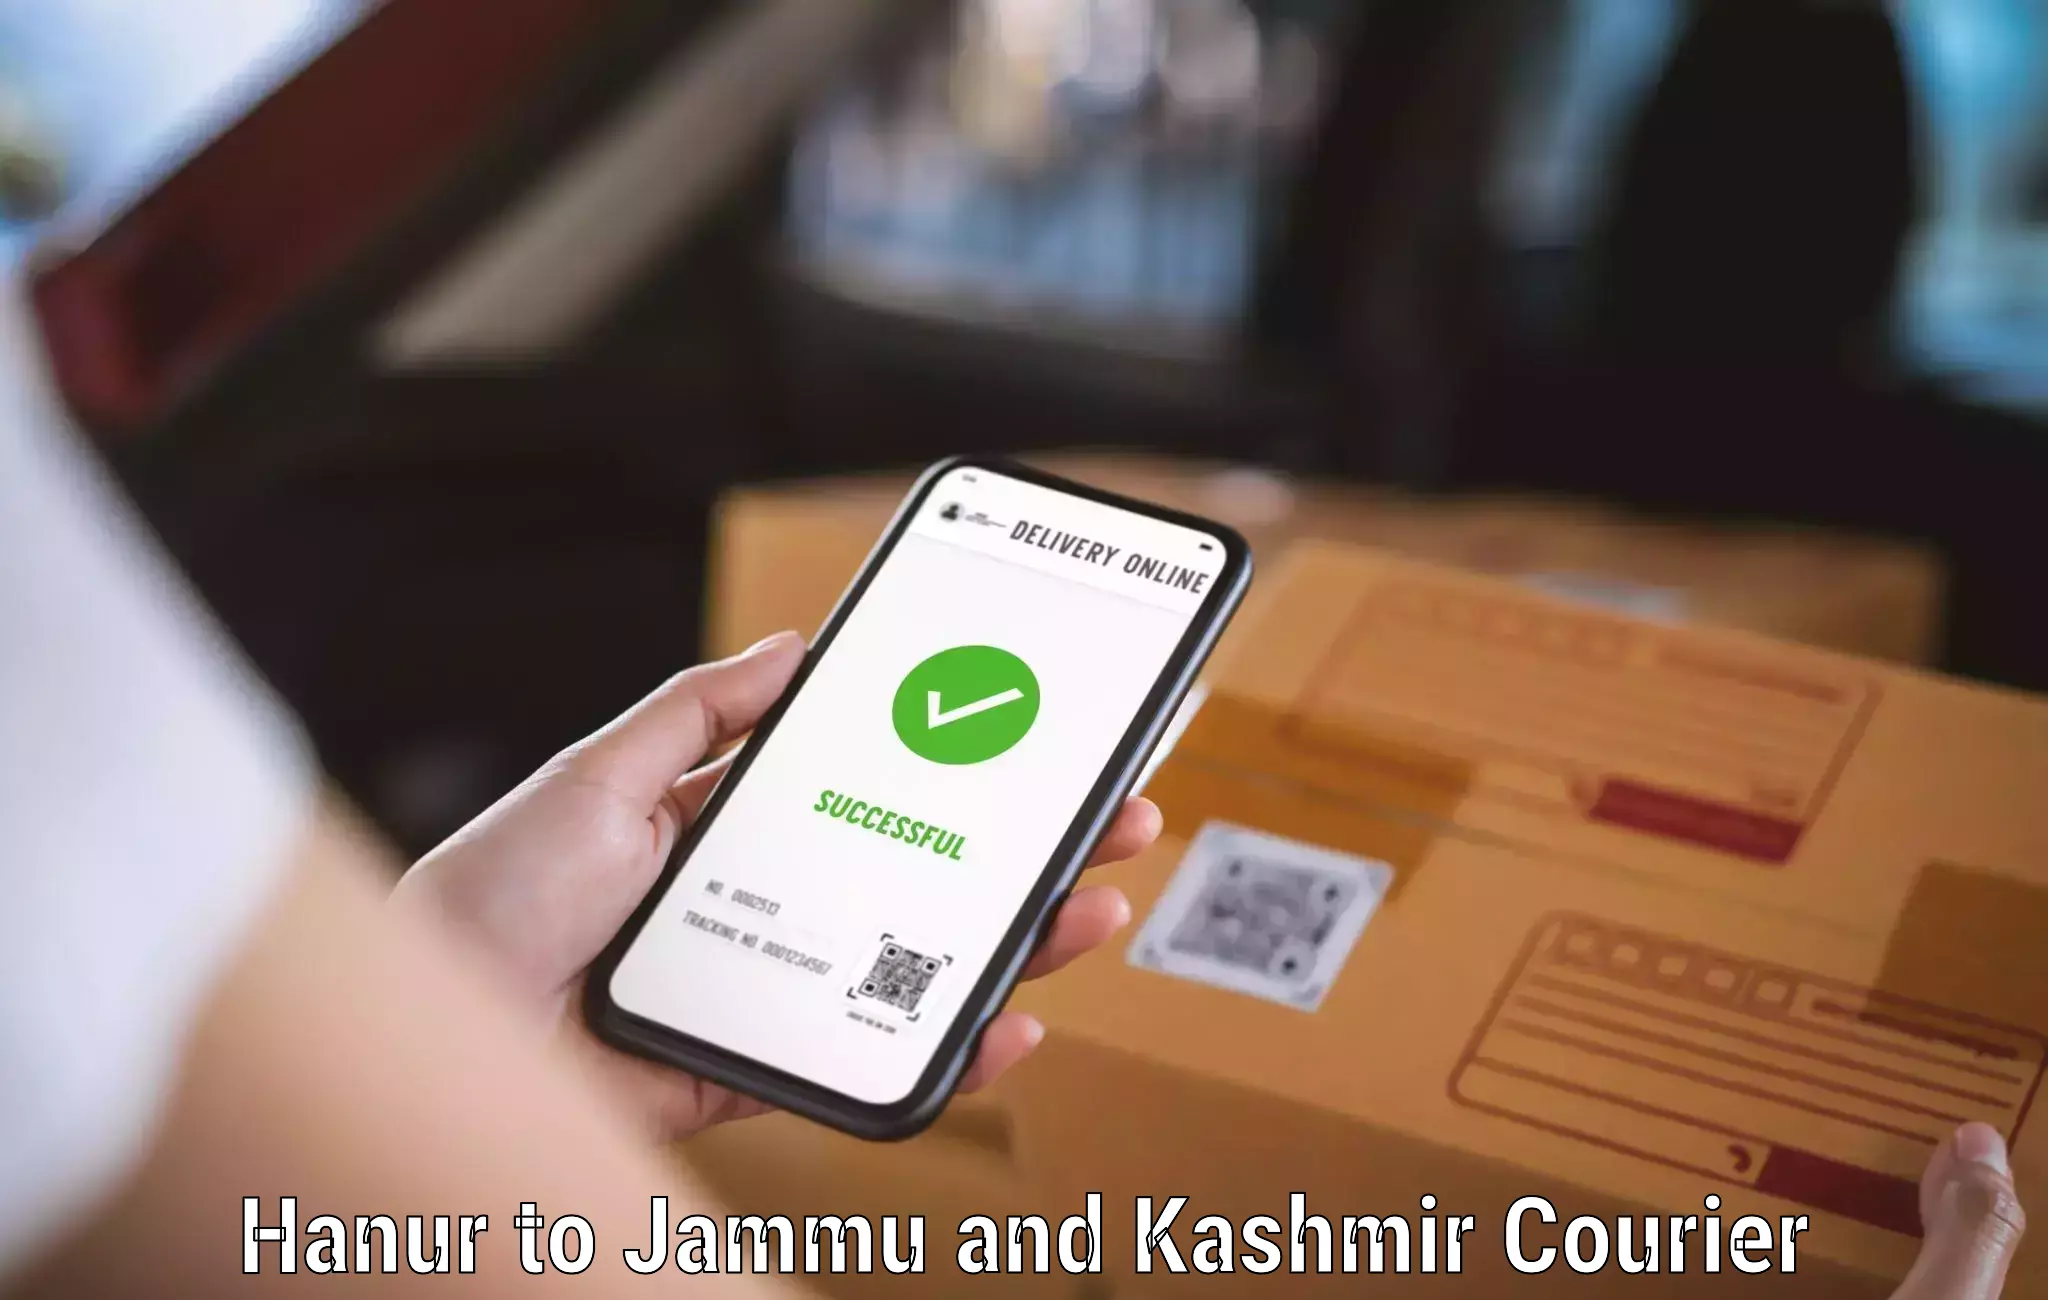 Courier service efficiency Hanur to Chenani